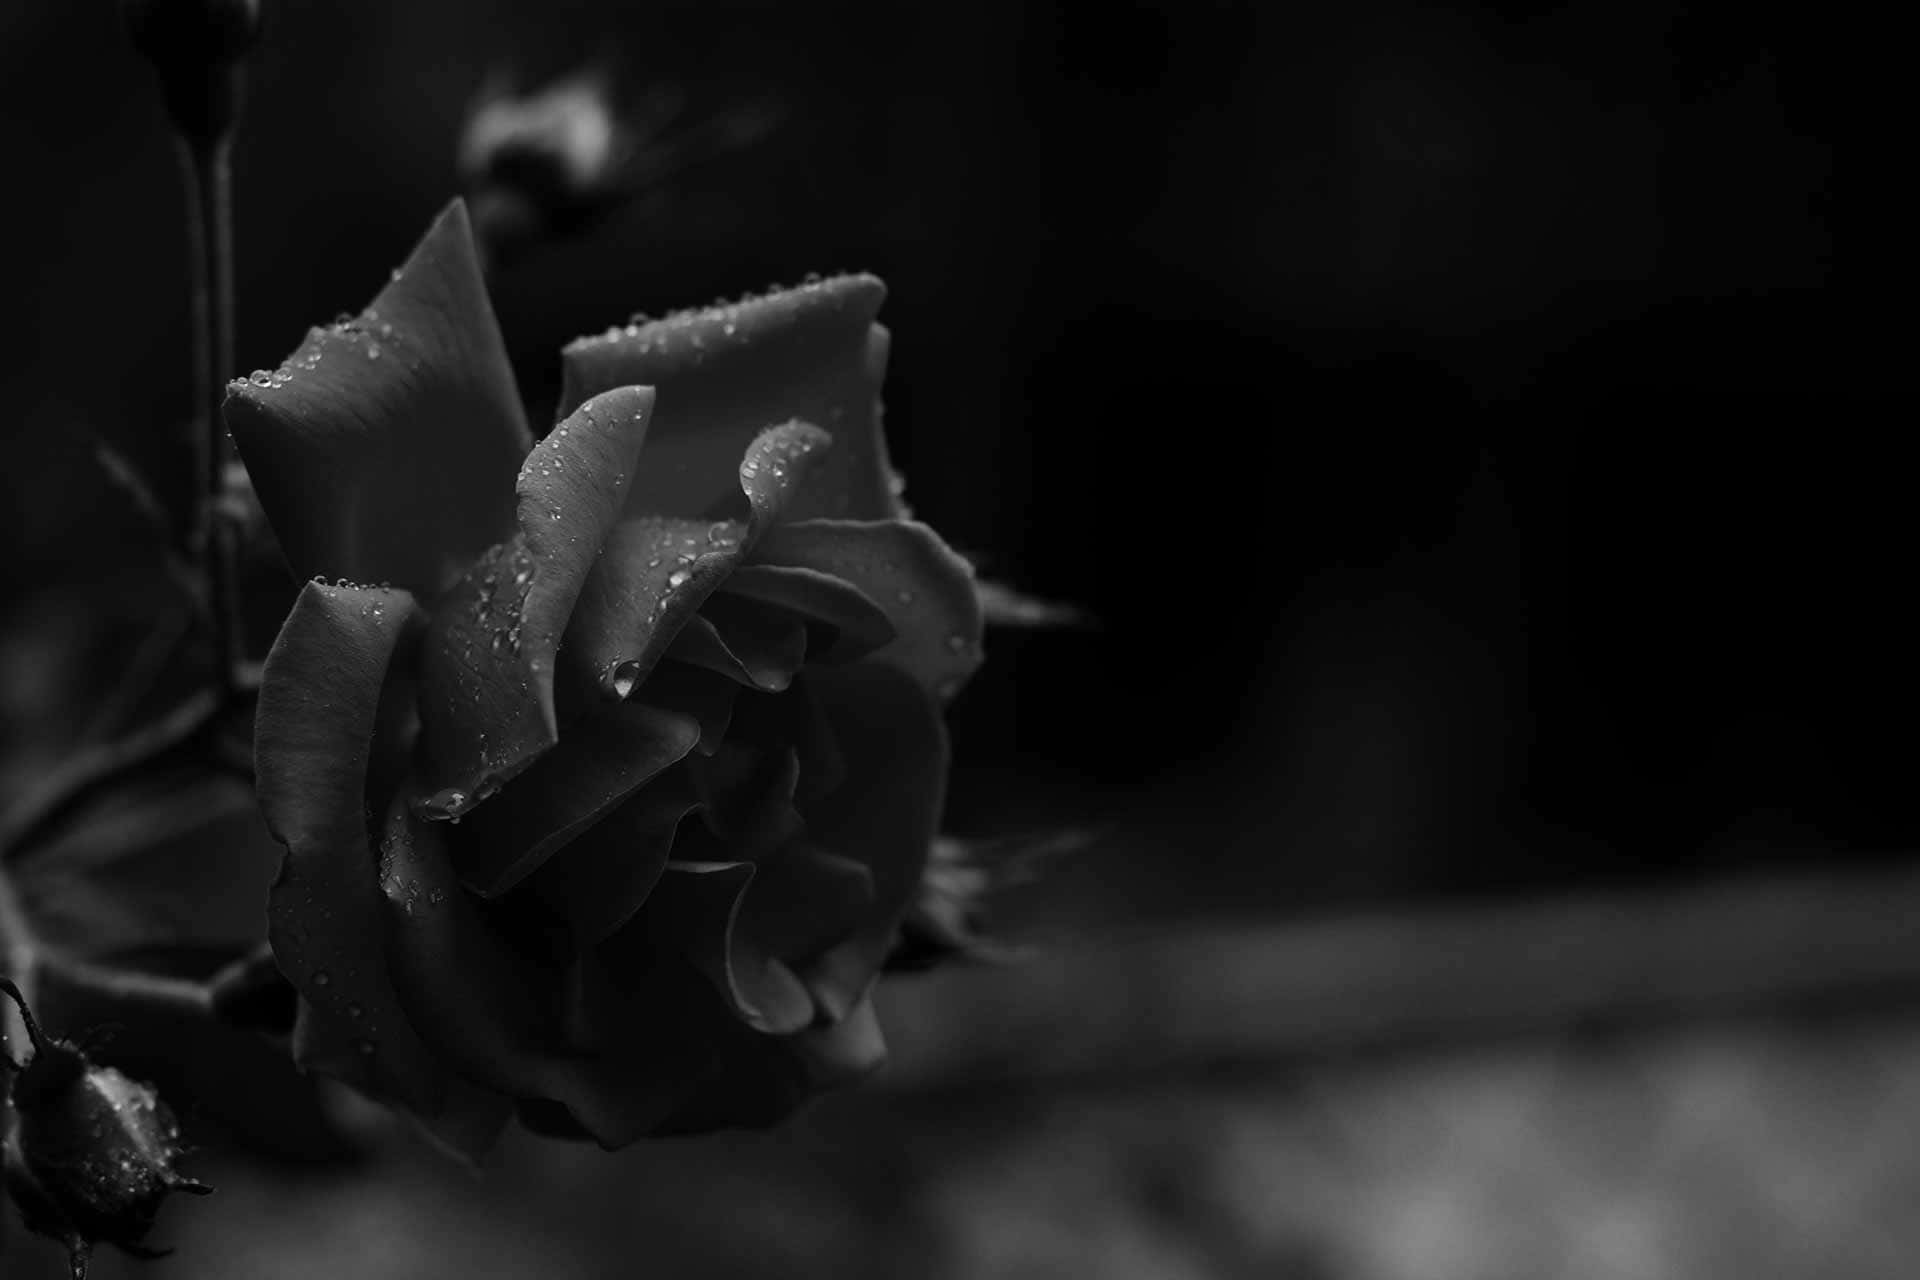 The beauty of a black rose